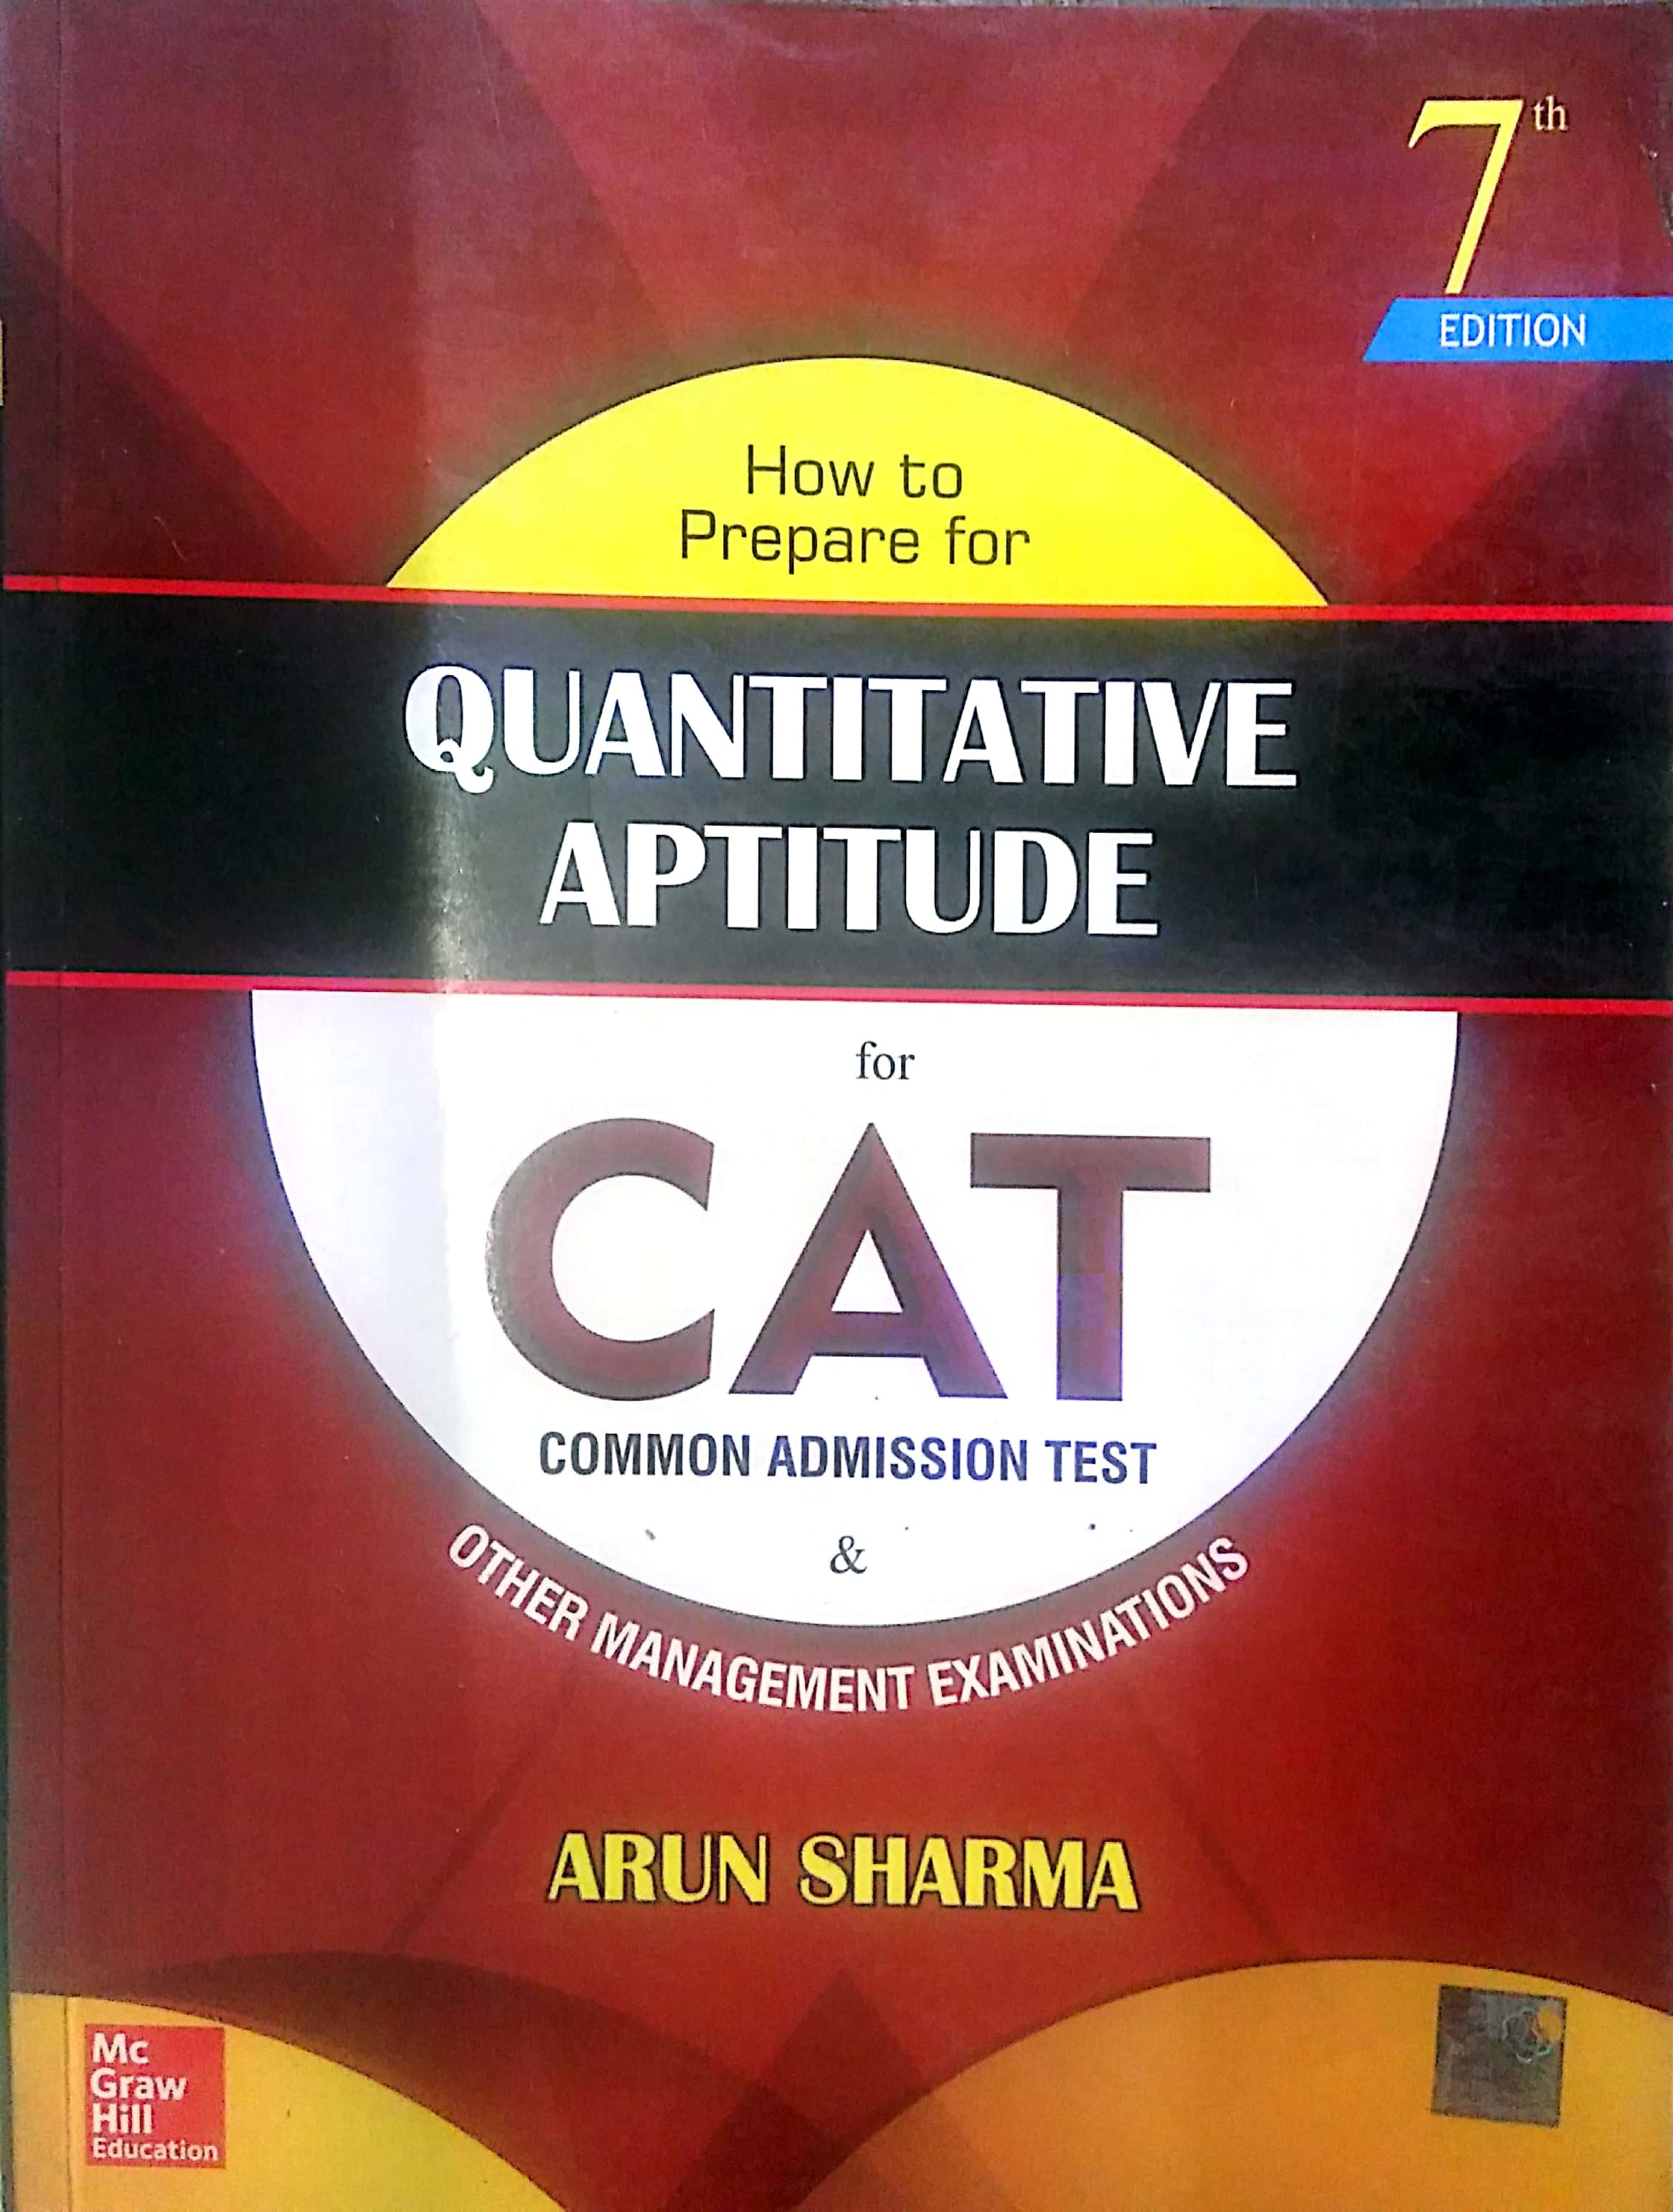 routemybook-buy-how-to-prepare-for-quantitative-aptitude-for-the-cat-7th-edition-by-arun